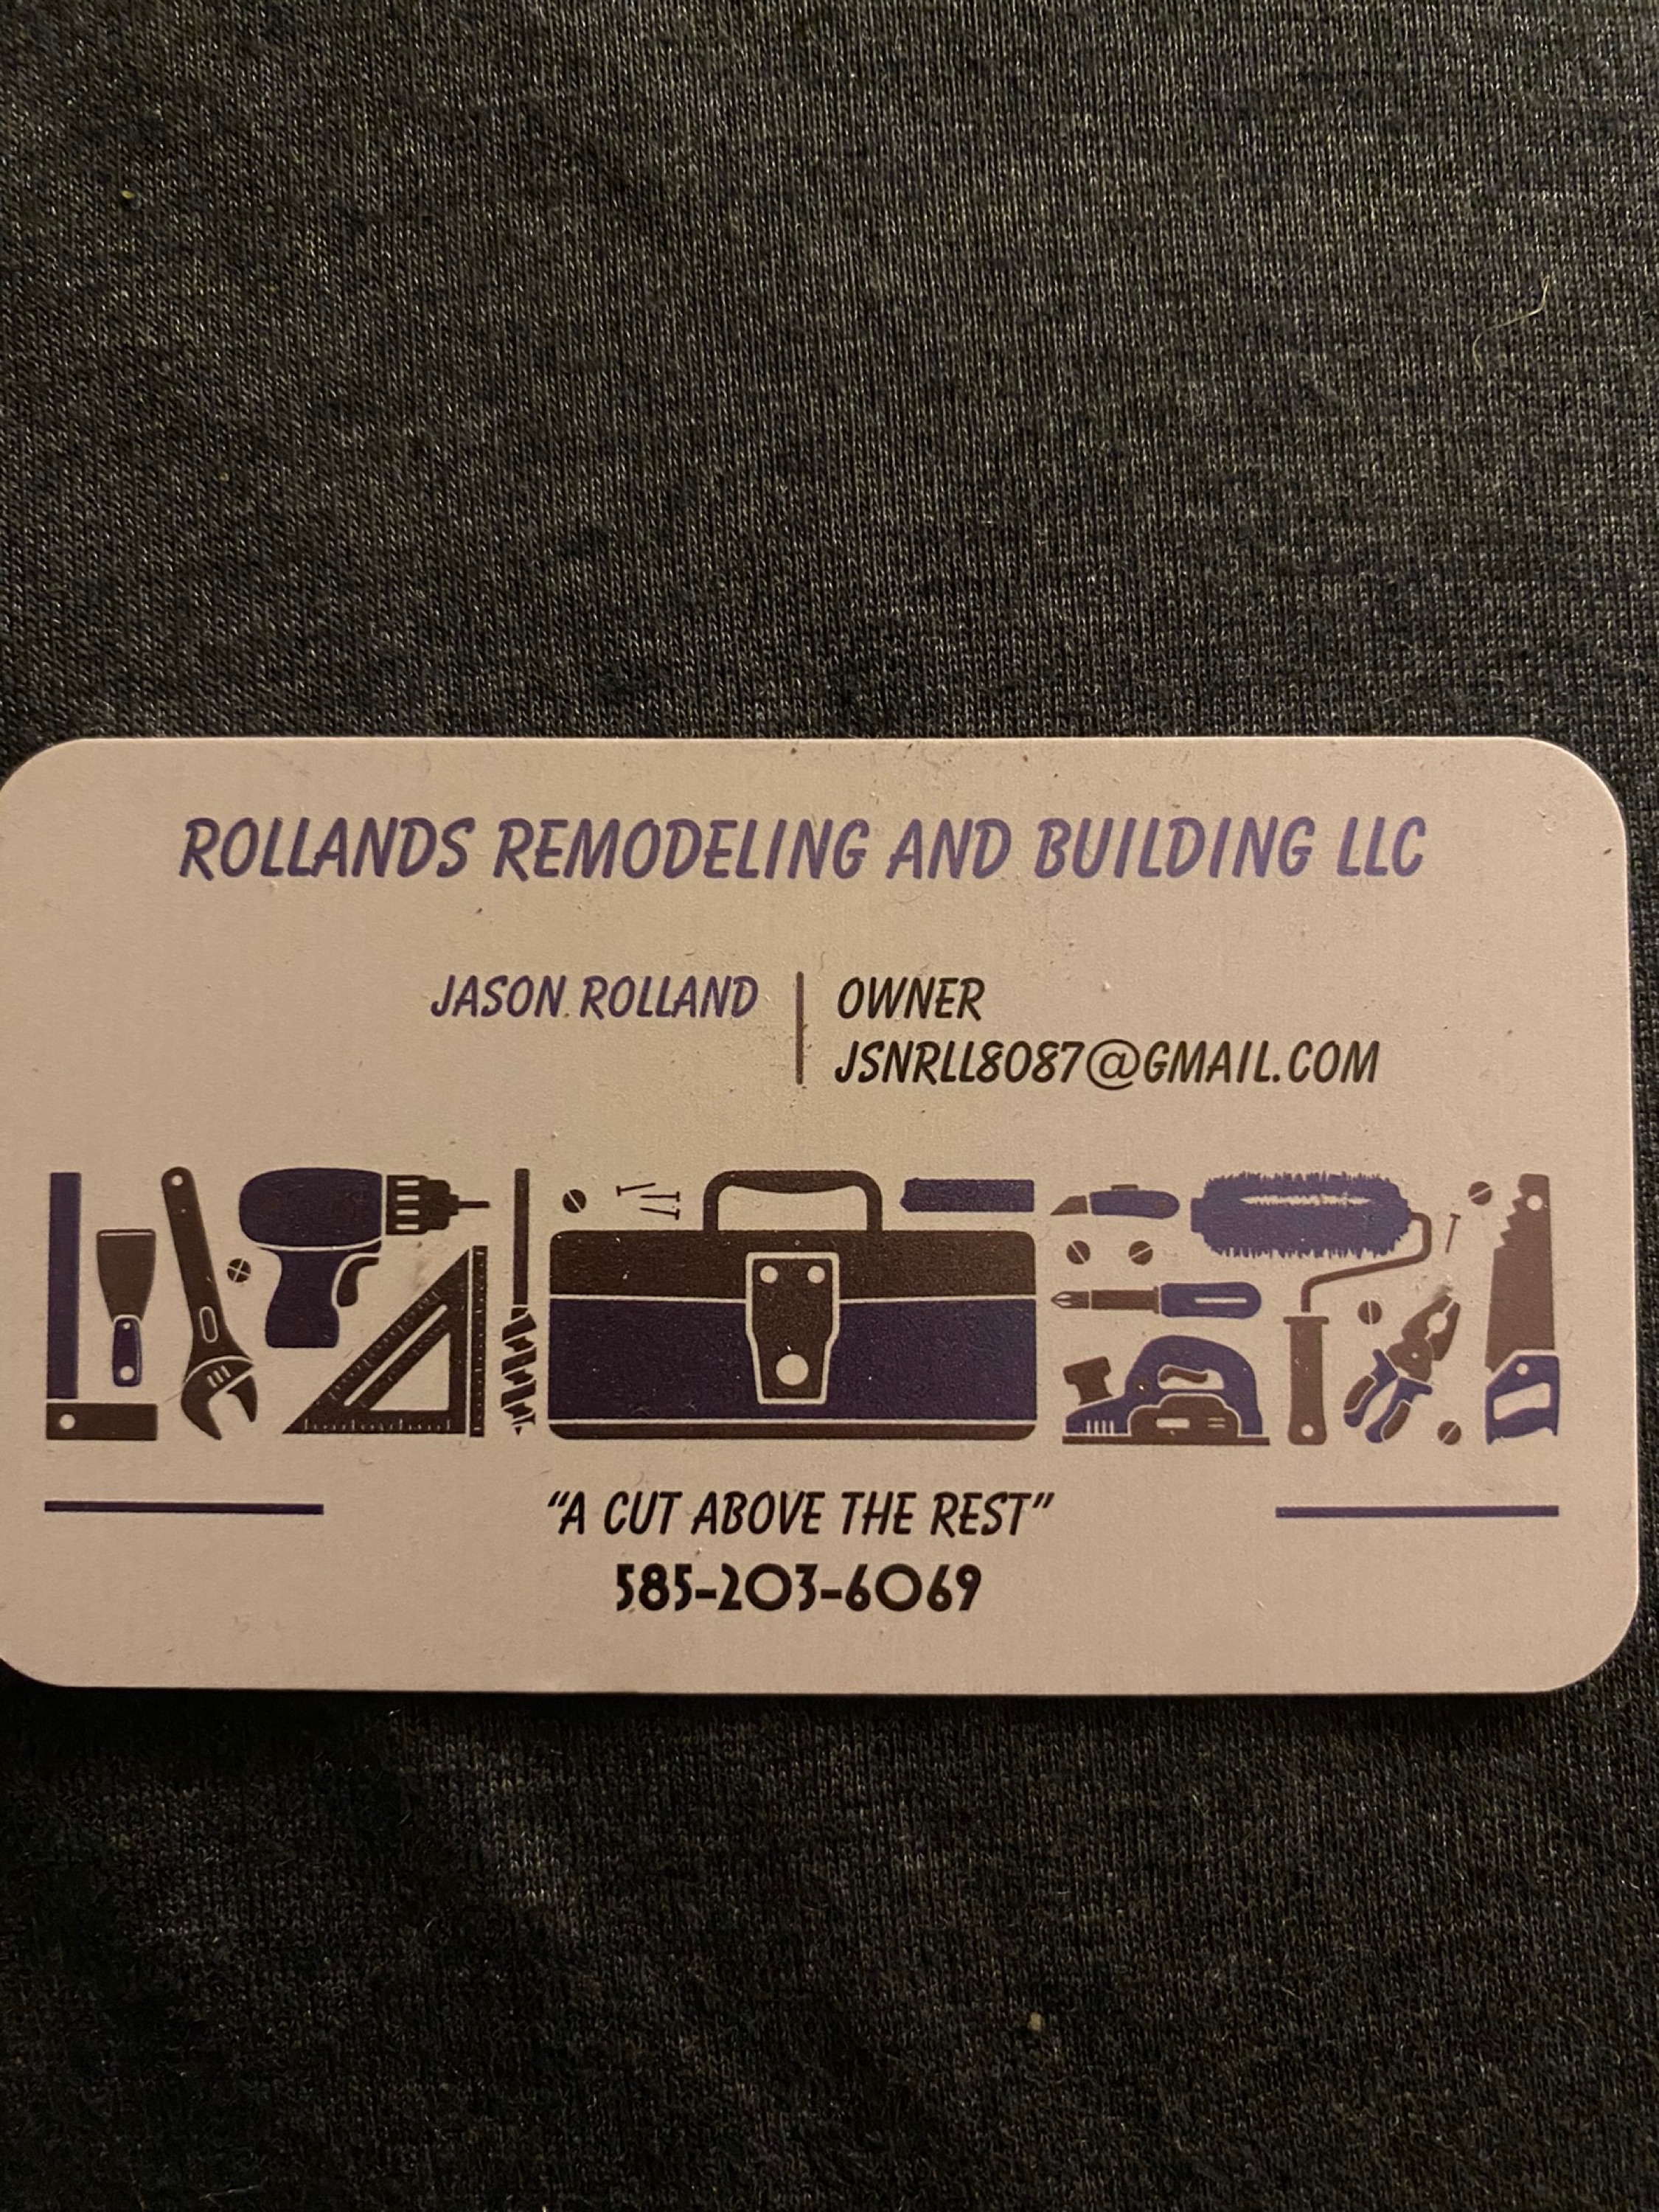 Rollands Remodeling and Building Logo